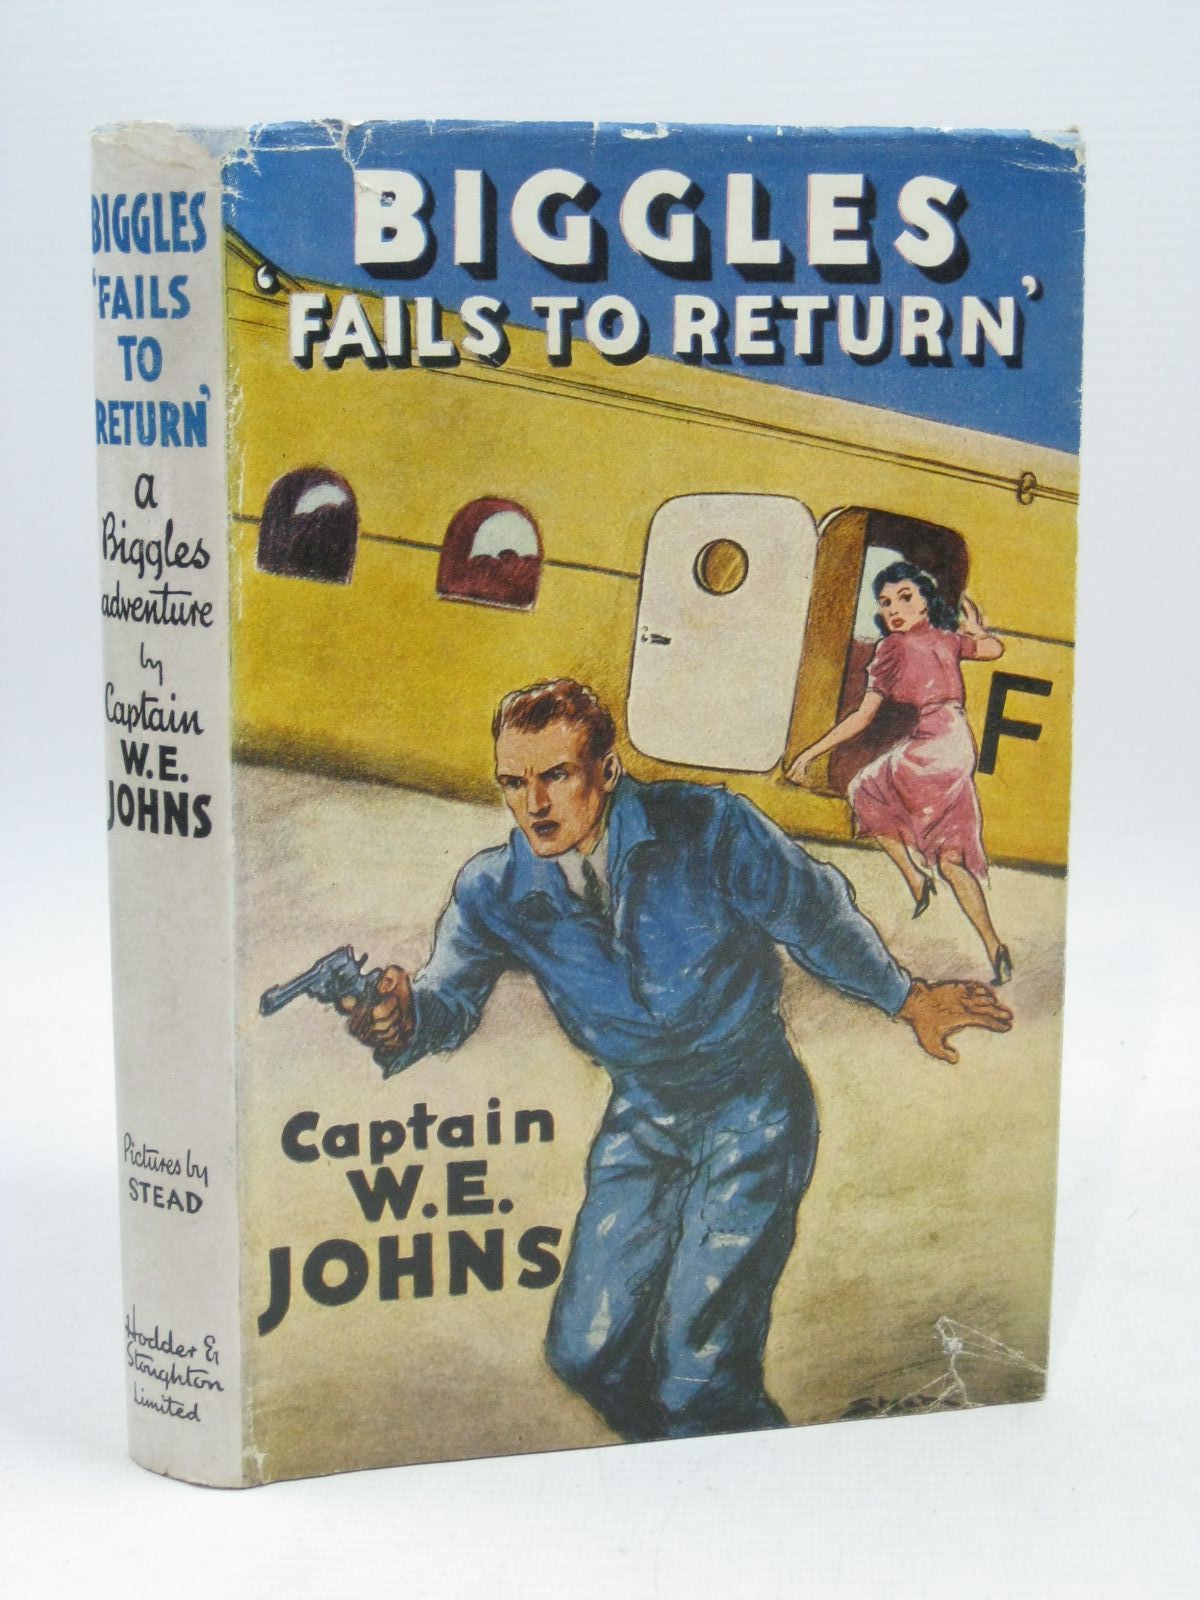 Cover of BIGGLES FAILS TO RETURN by W.E. Johns